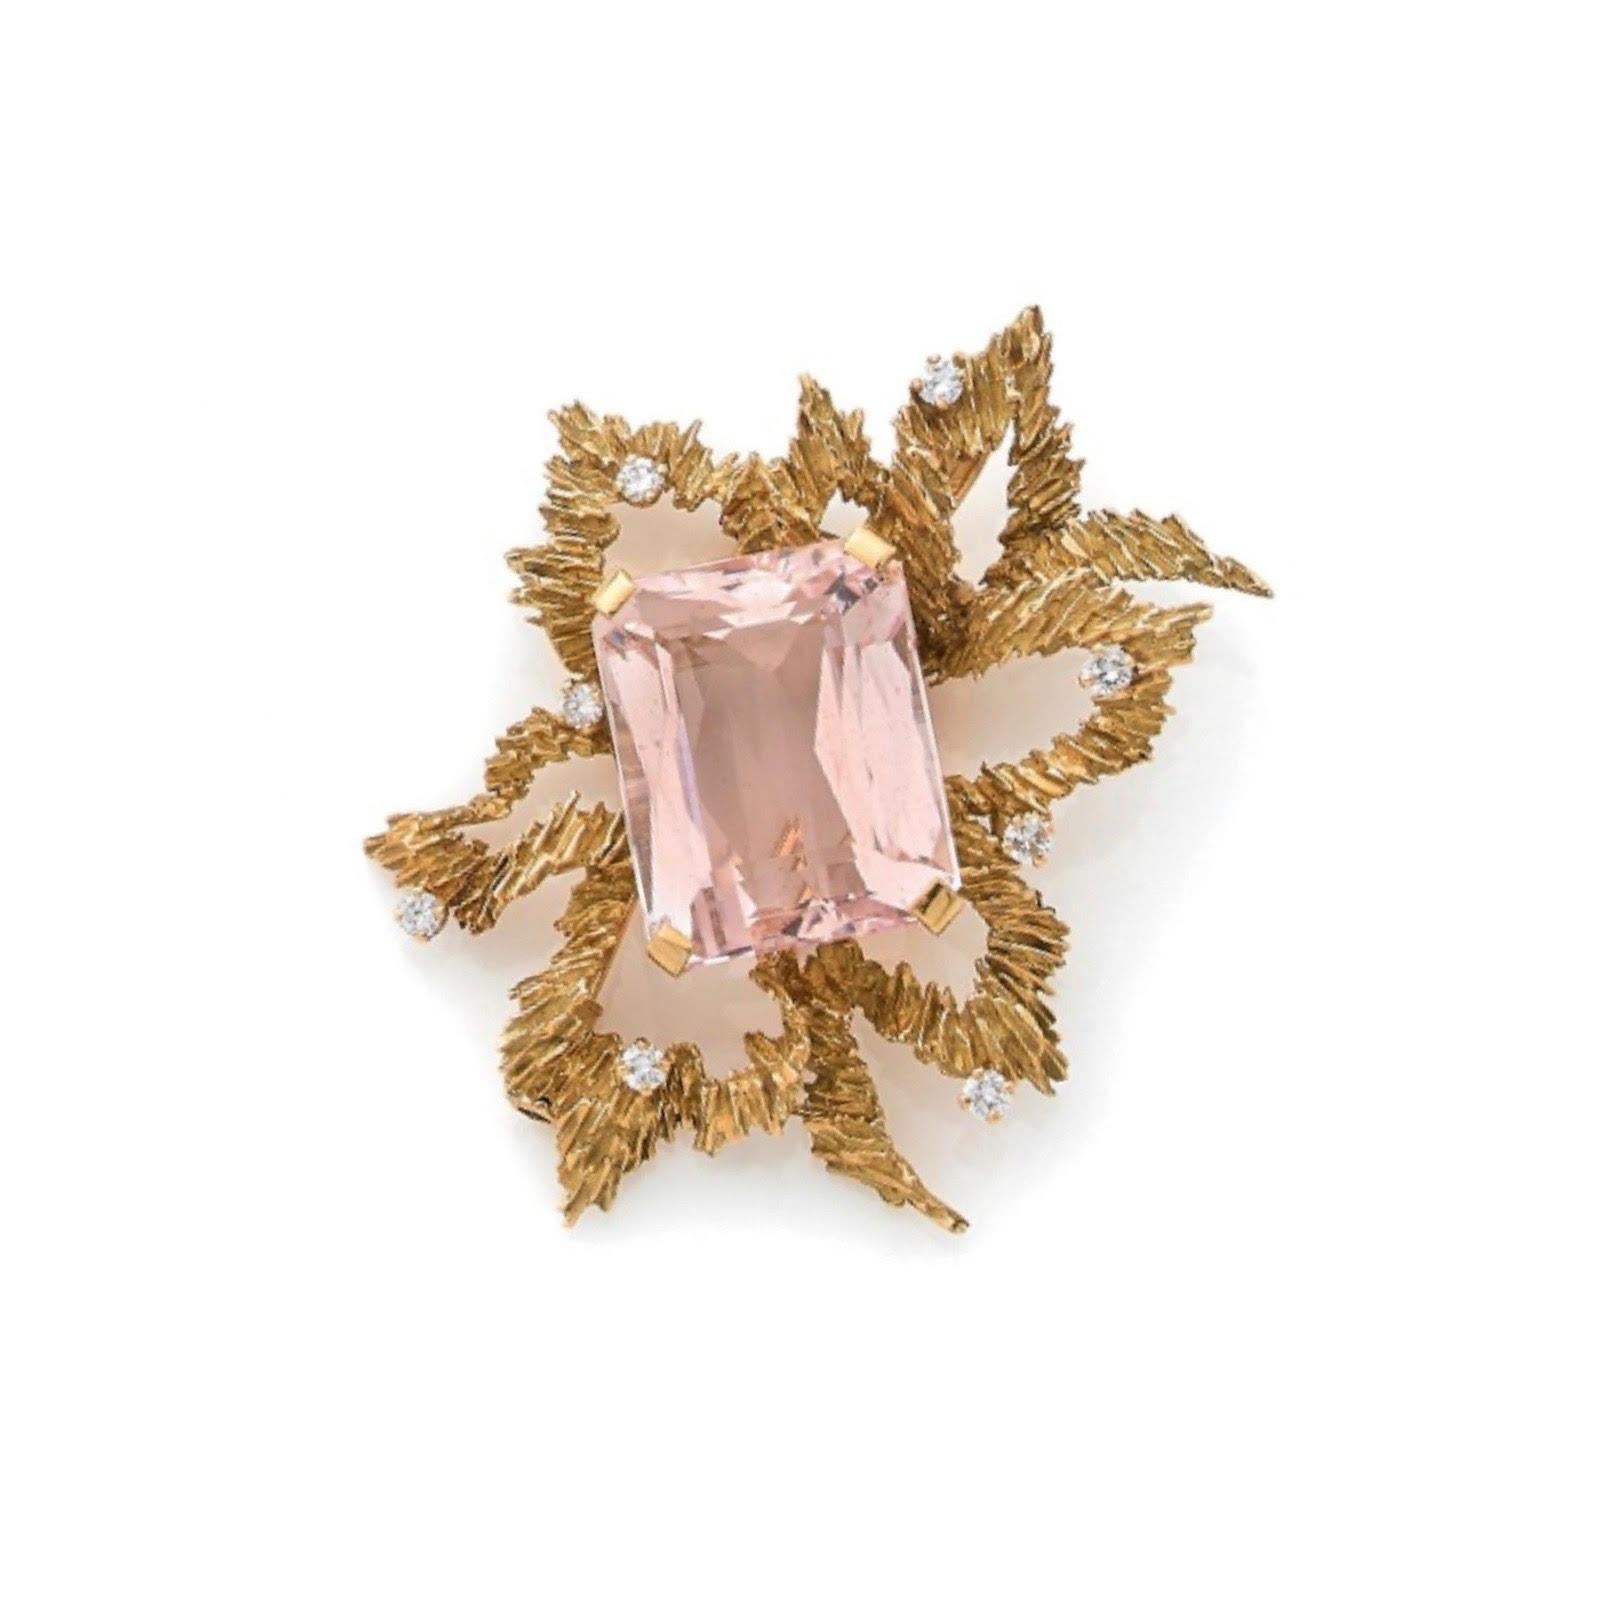 Elegant, partially matt yellow gold brooch featuring a stylised openwork flower set with diamonds and an imposing morganite.

The petals are delicately carved, punctuated with small brilliant-cut diamonds in cluster set.

The center is adorned with